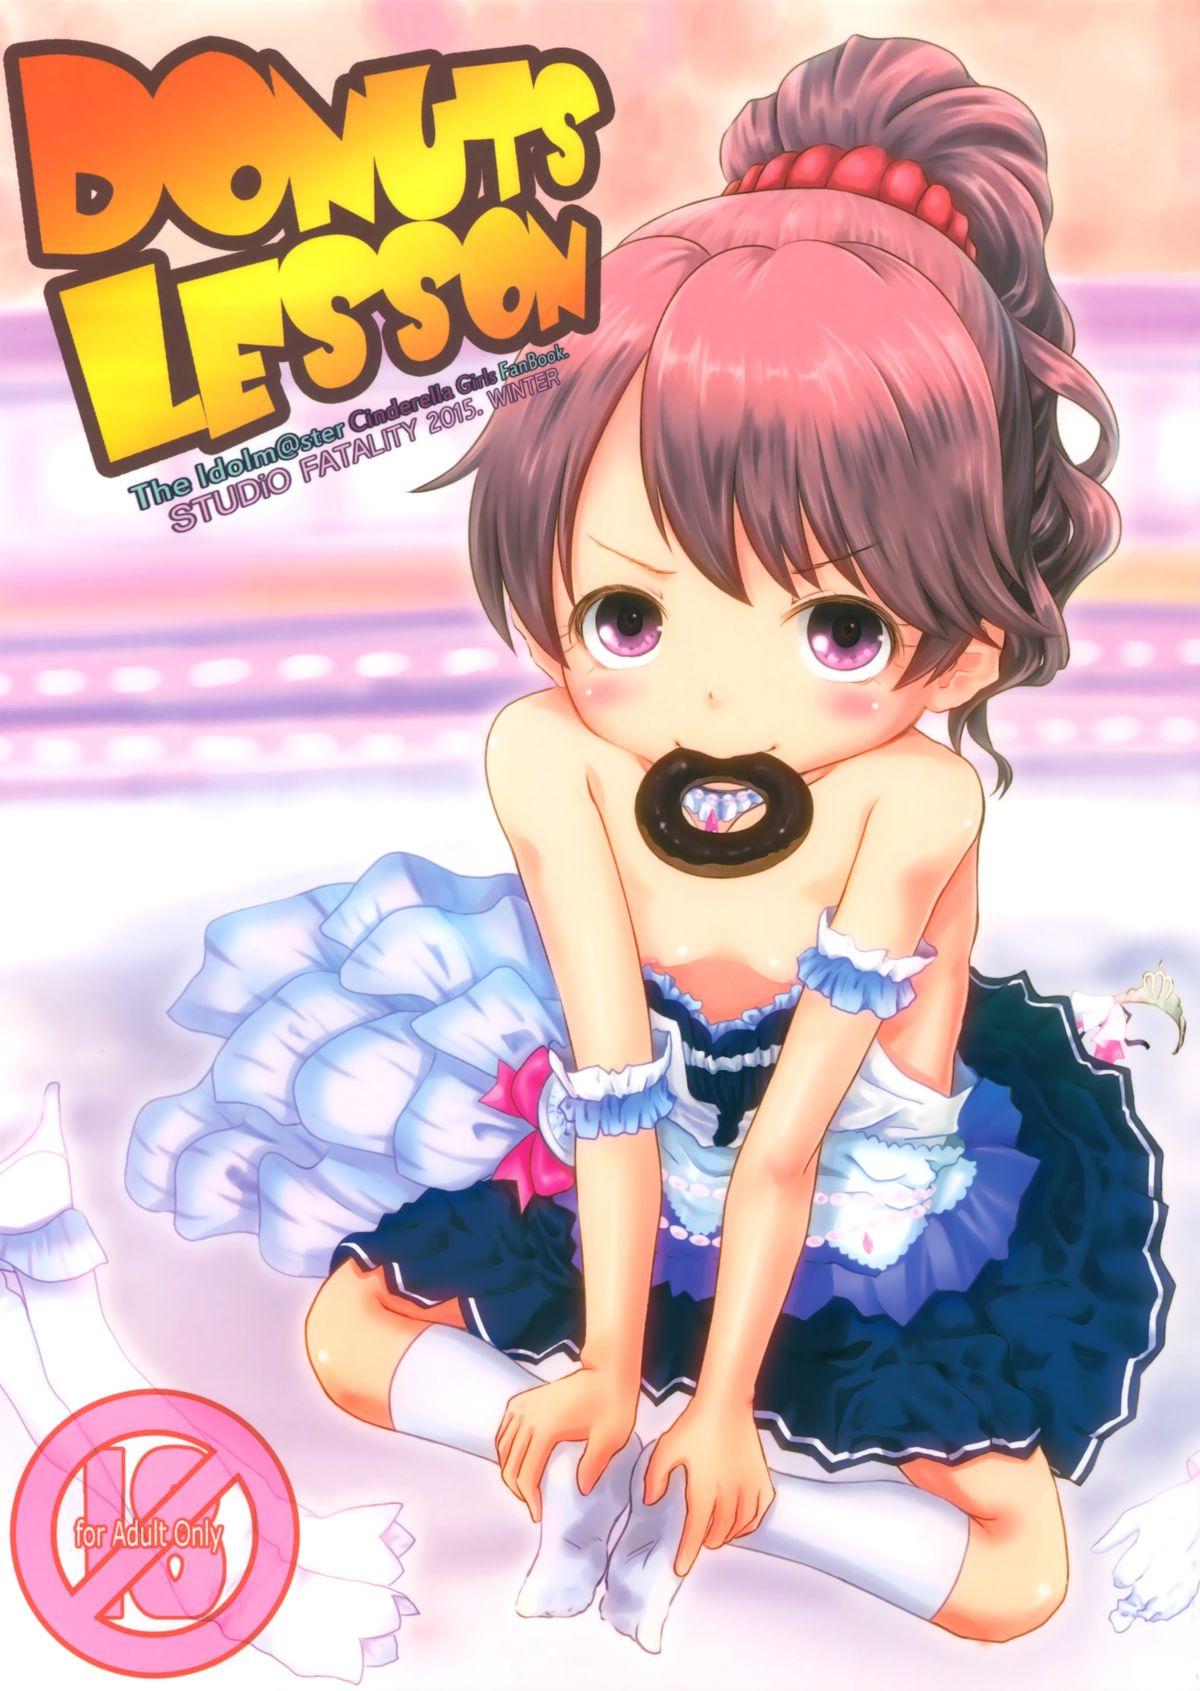 From DONUTS LESSON - The idolmaster Shaved - Picture 1